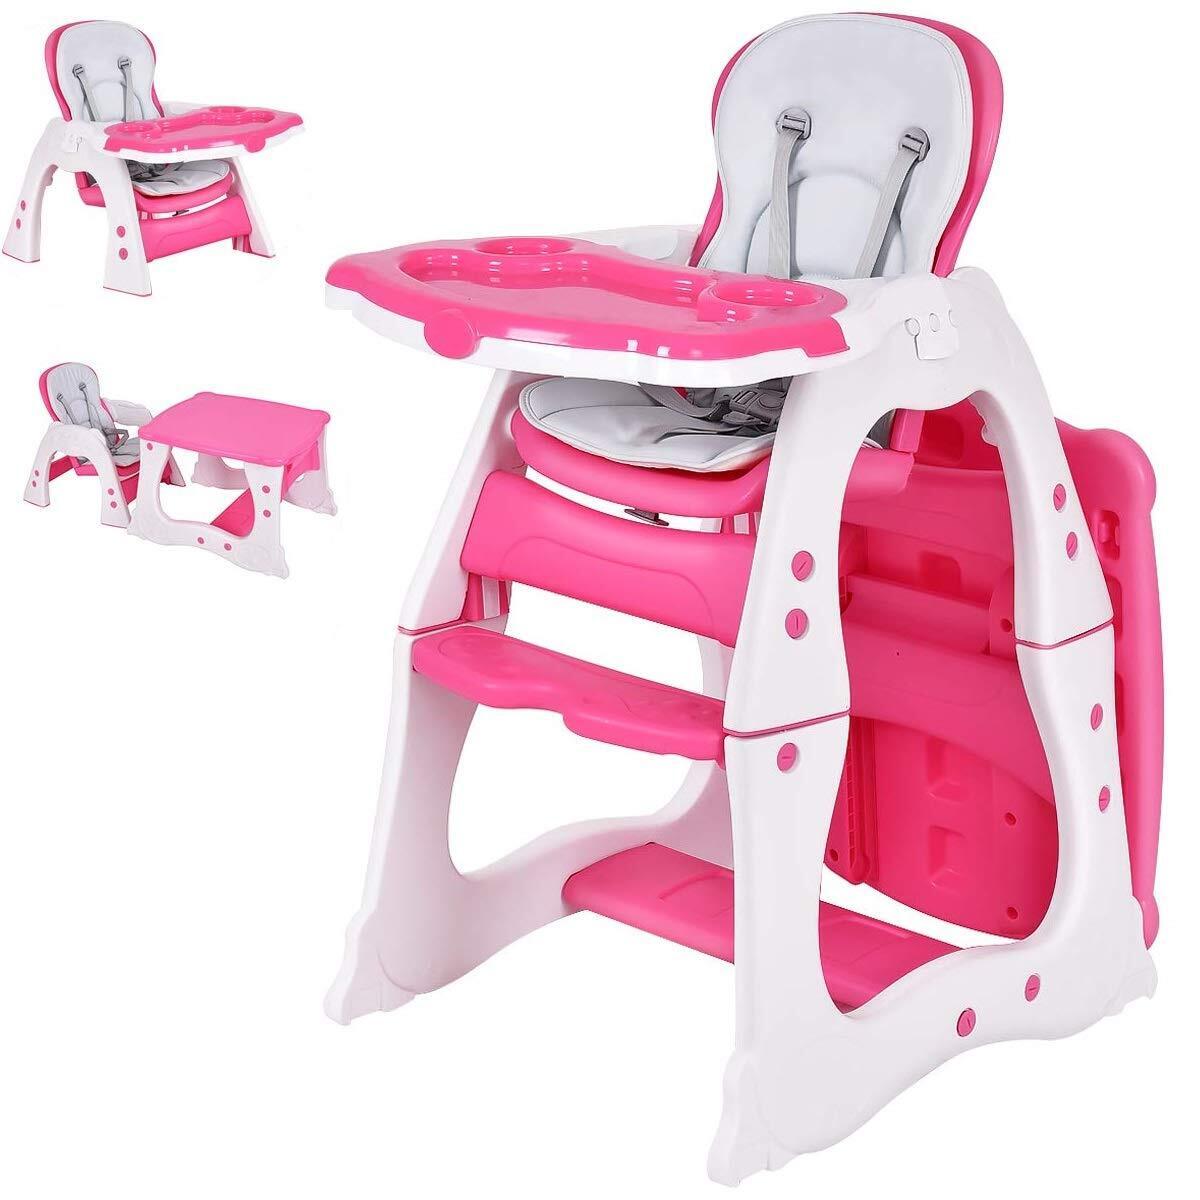 3 In 1 Baby High Chair Convertible Table Chair Set Booster Seat